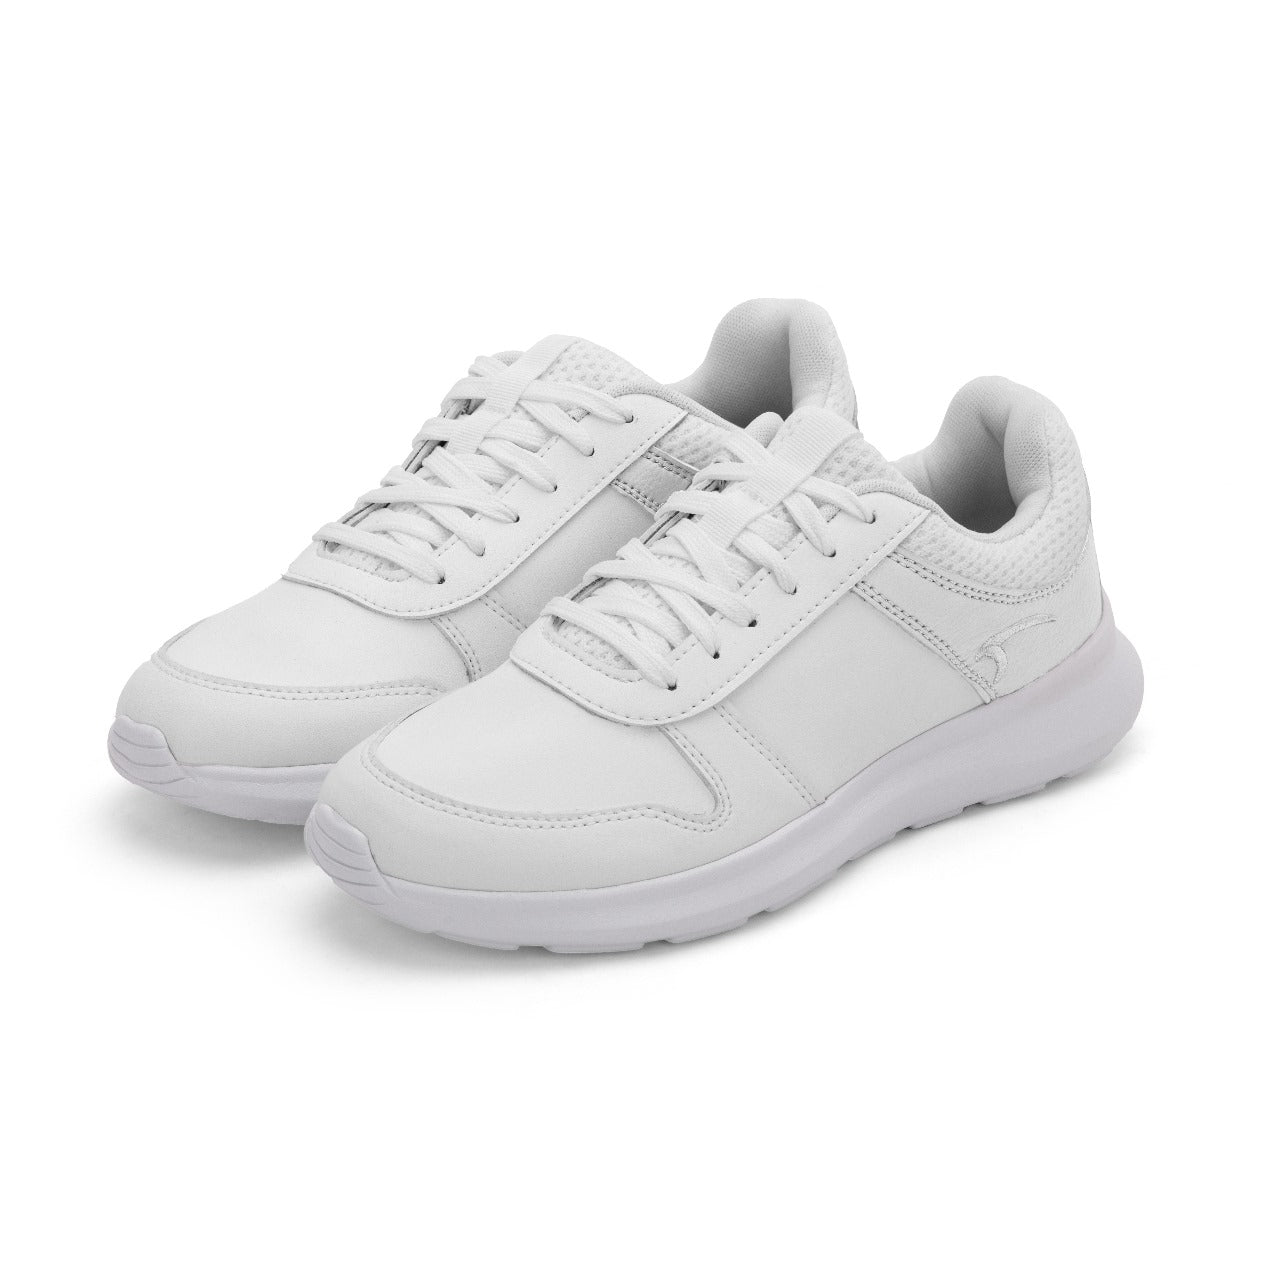 Mintra Alpha Lifestyle Shoes For Women, White